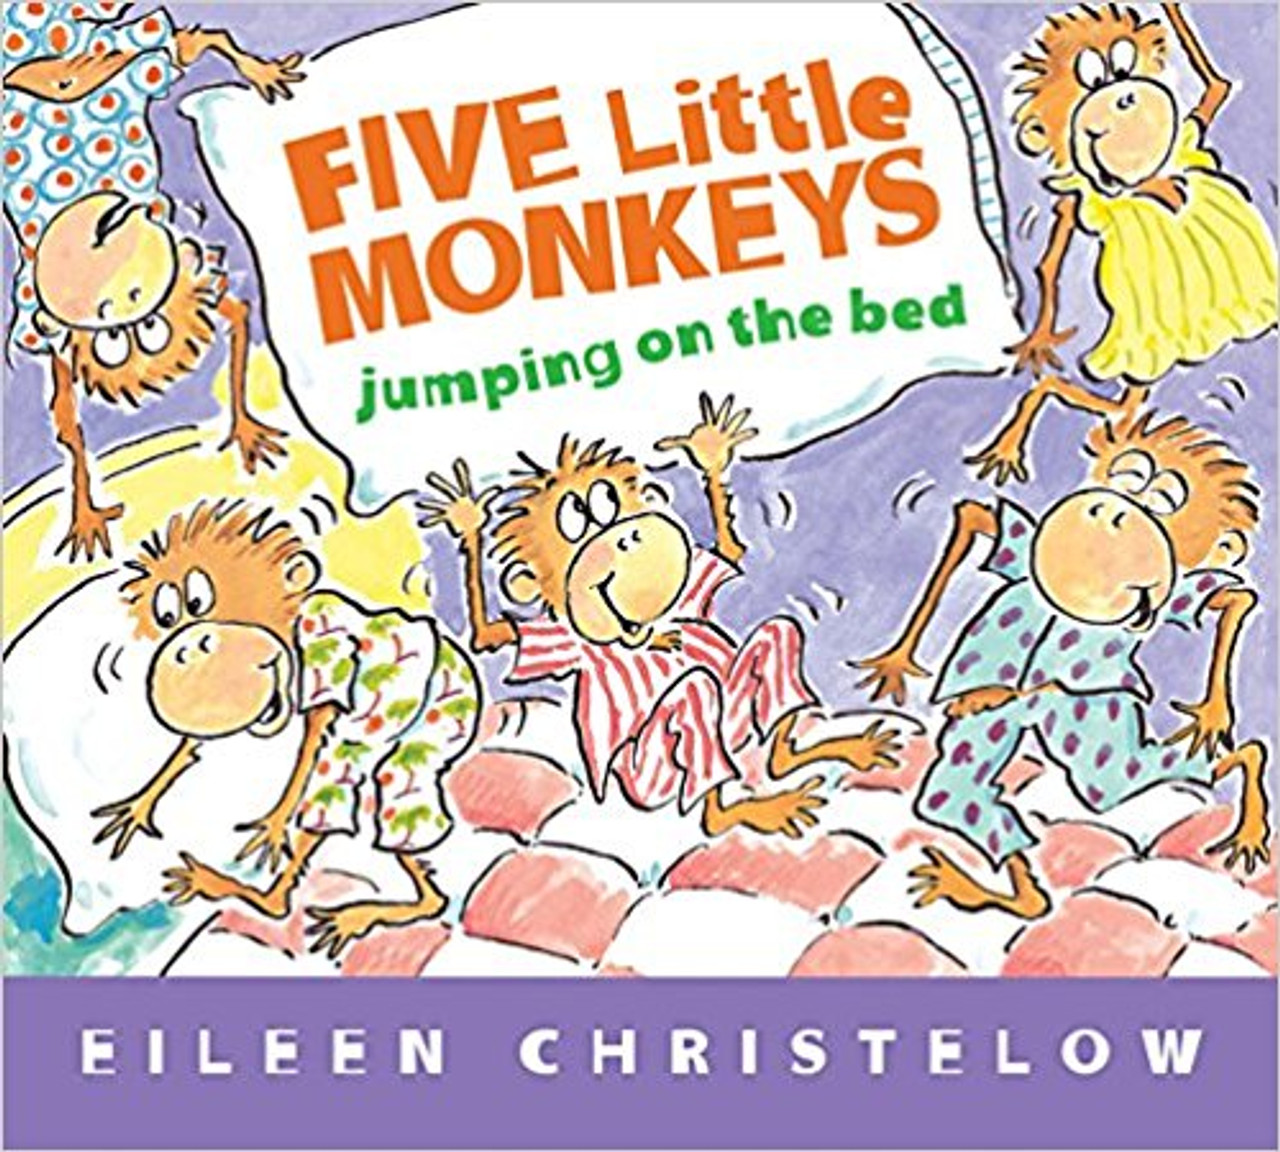 As soon as they say good night to Mama, the five little monkeys start to jump on their bed.  But, trouble lies ahead as, one by one, they fall off and hurt themselves.